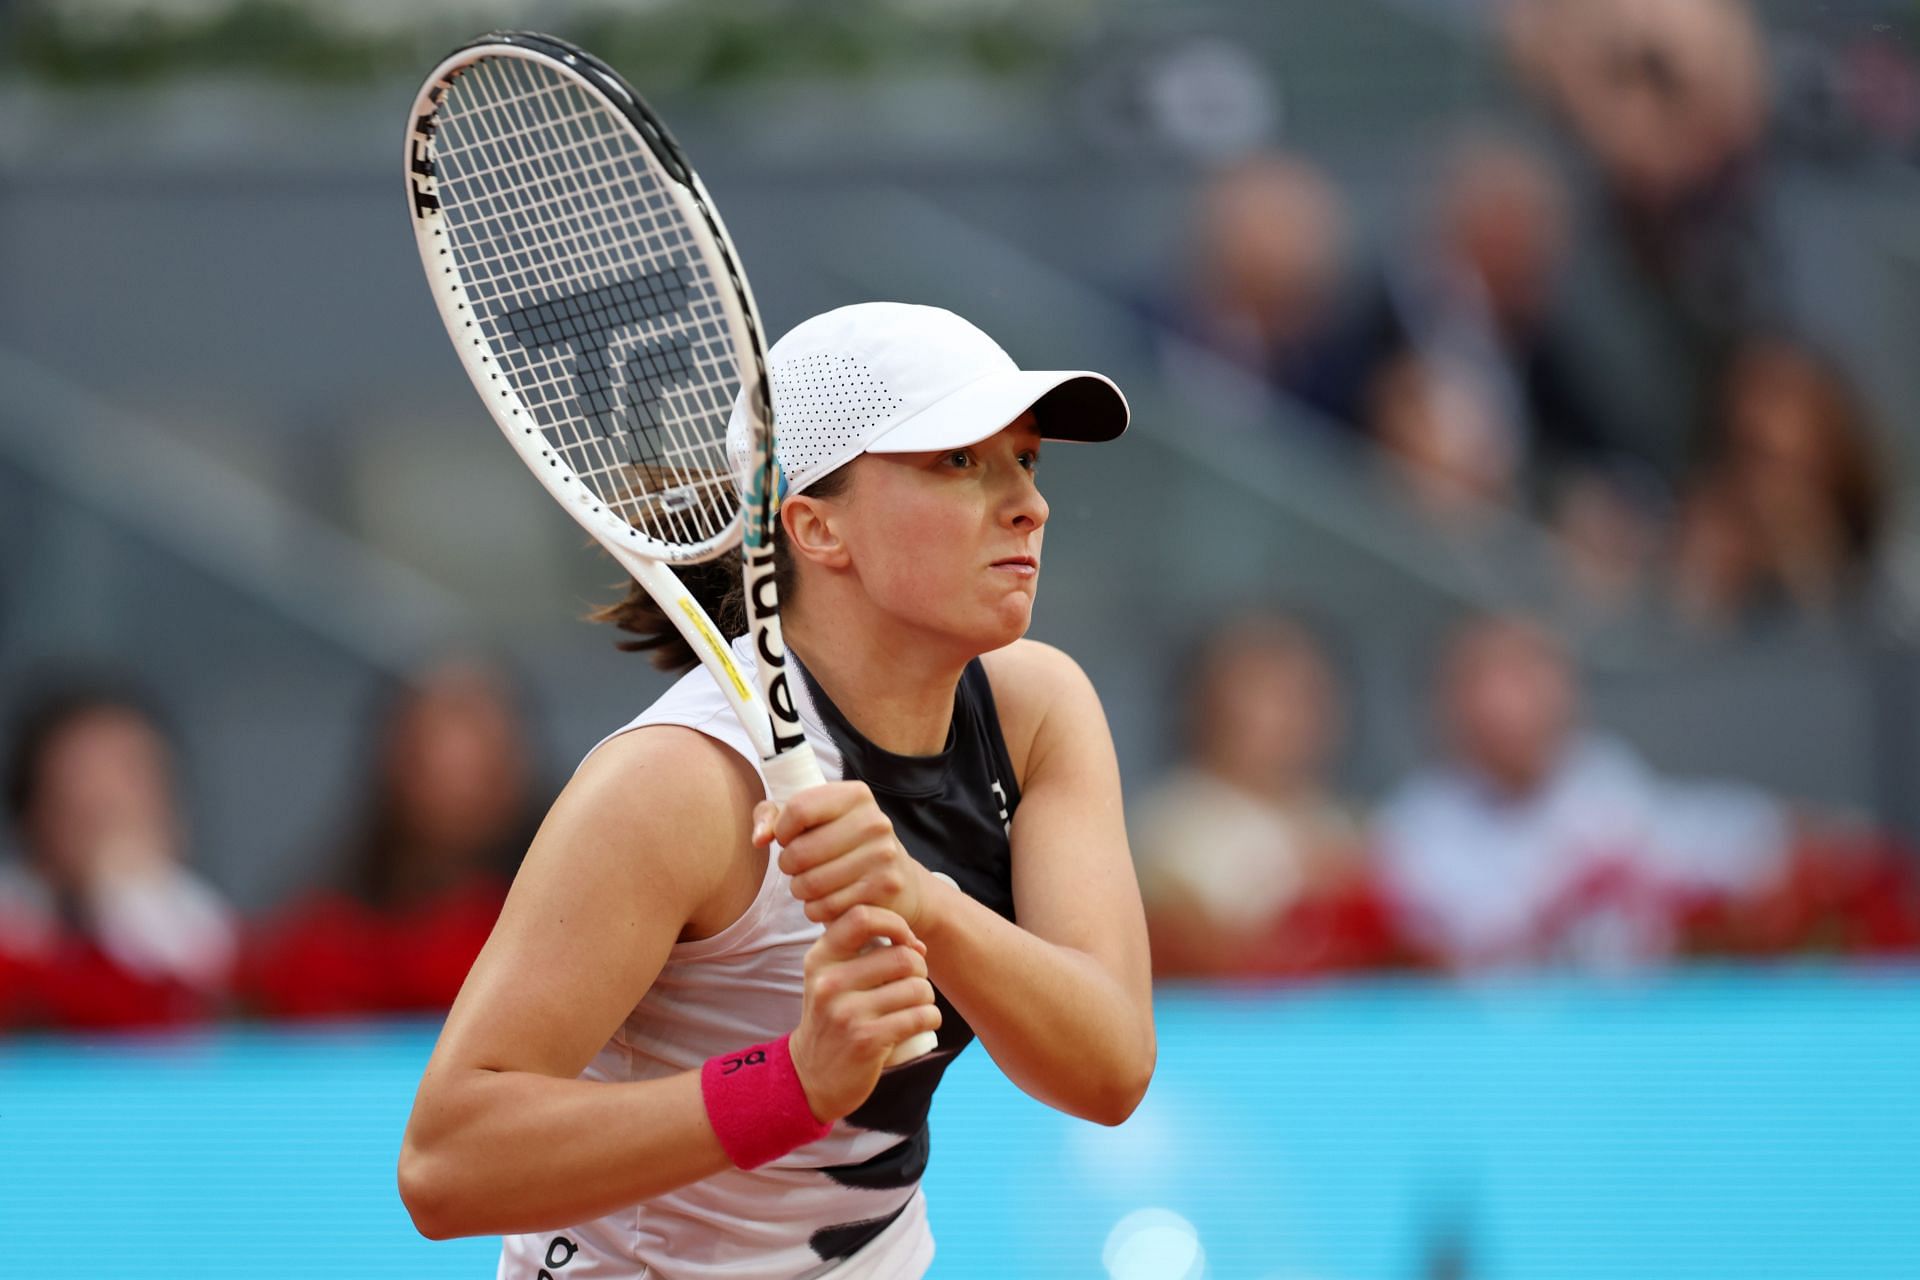 Iga Swiatek during her match against Petra Martic at the Madrid Open